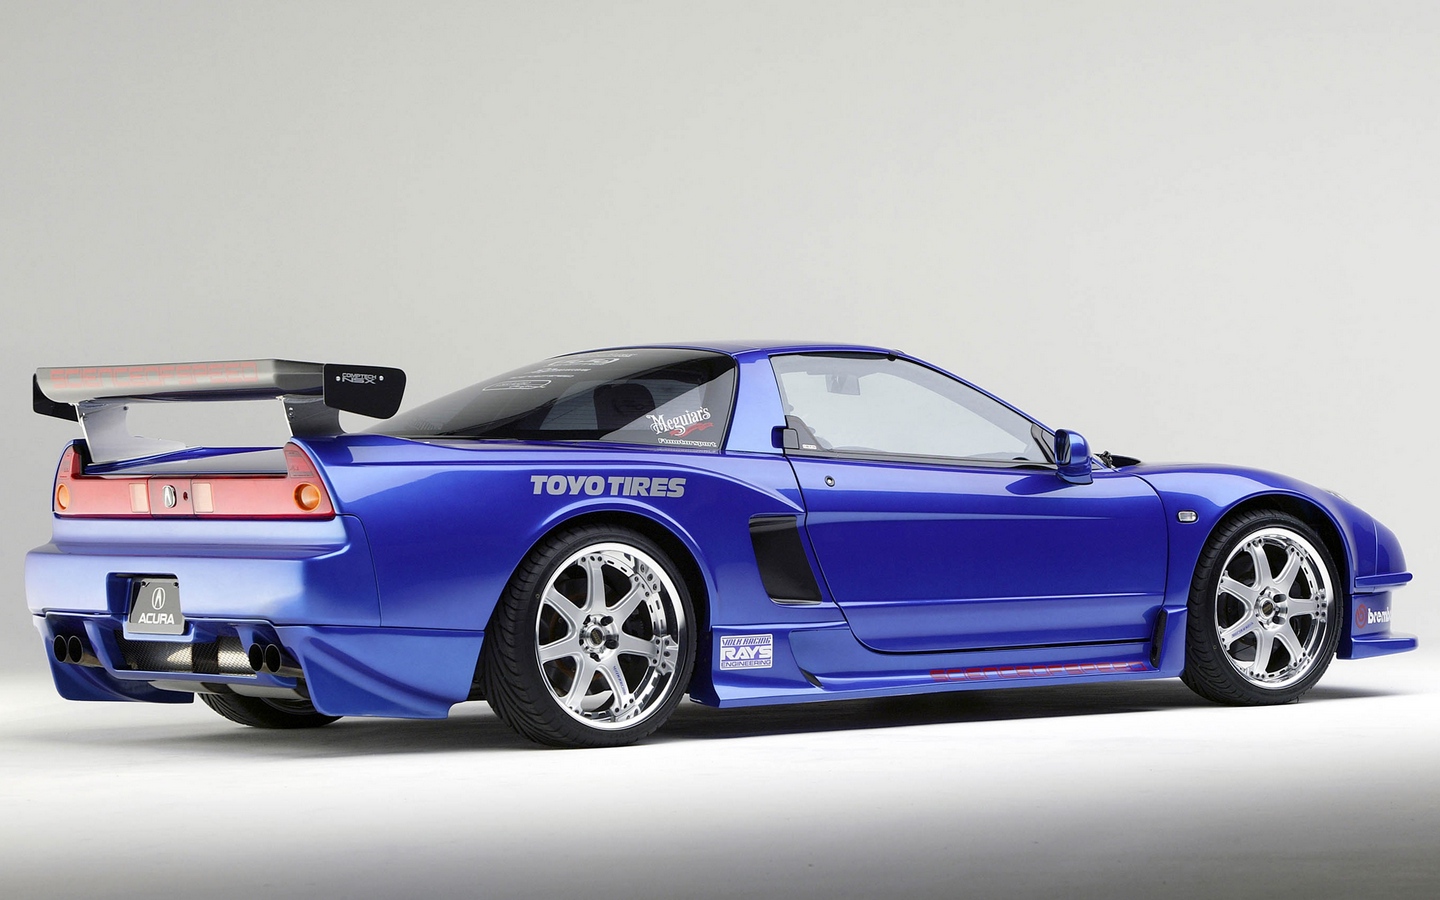 Acura NSX Mugen 2003 acura_nsx_blue_side_view_sports_style_13665_1440x900